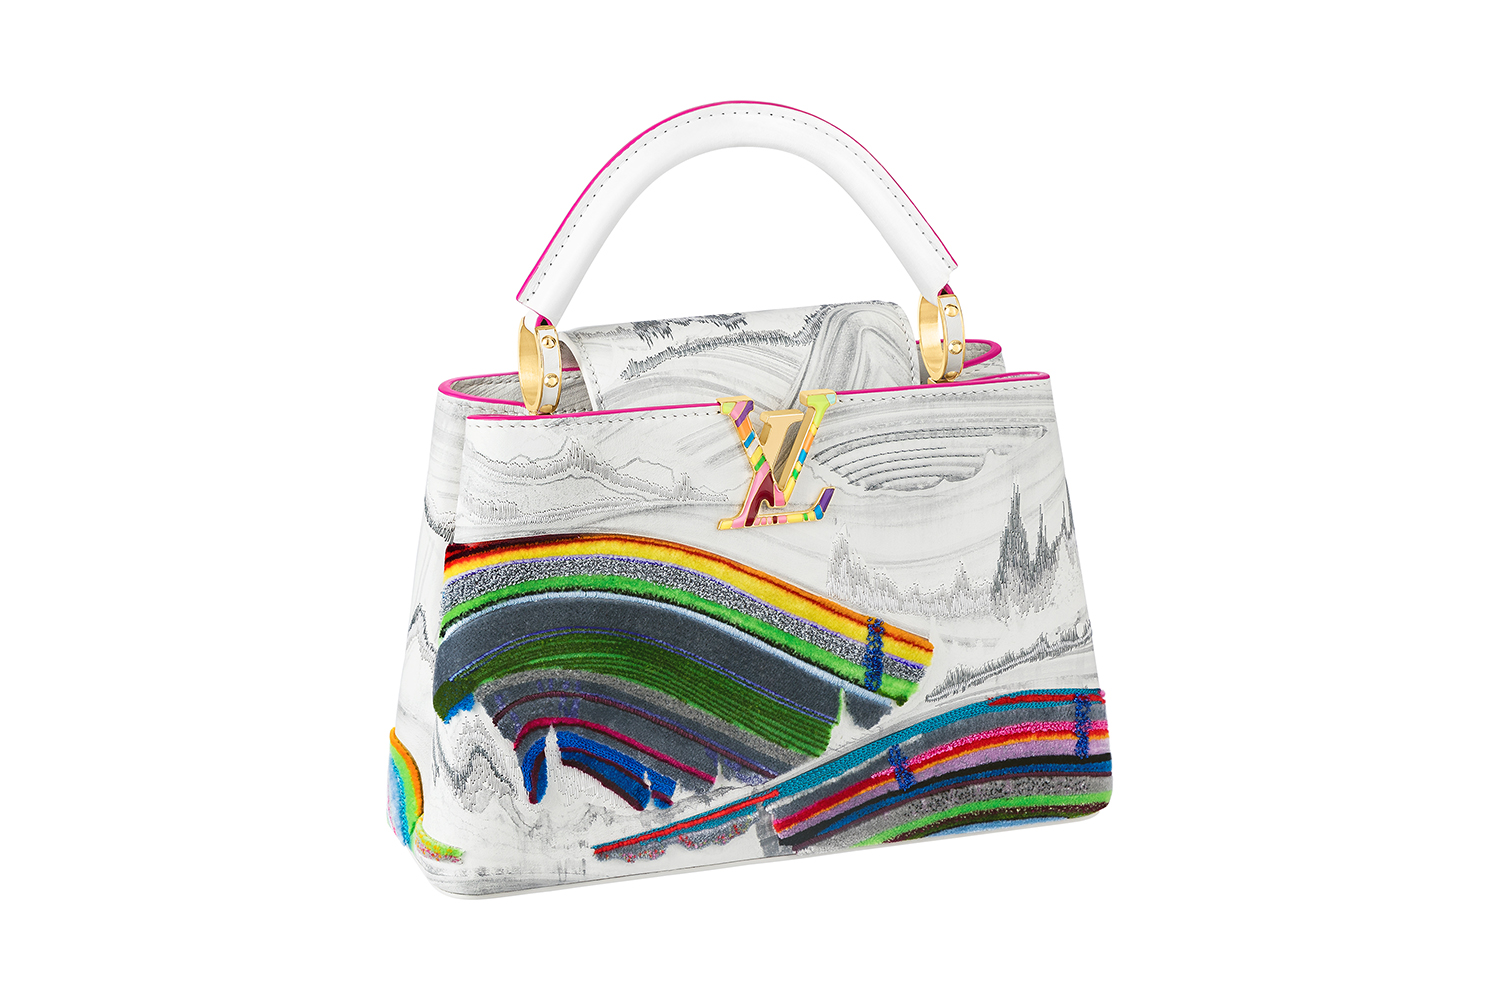 Louis Vuitton Collaborates with Sotheby's on Artycapucines Bags for Charity, Handbags and Accessories